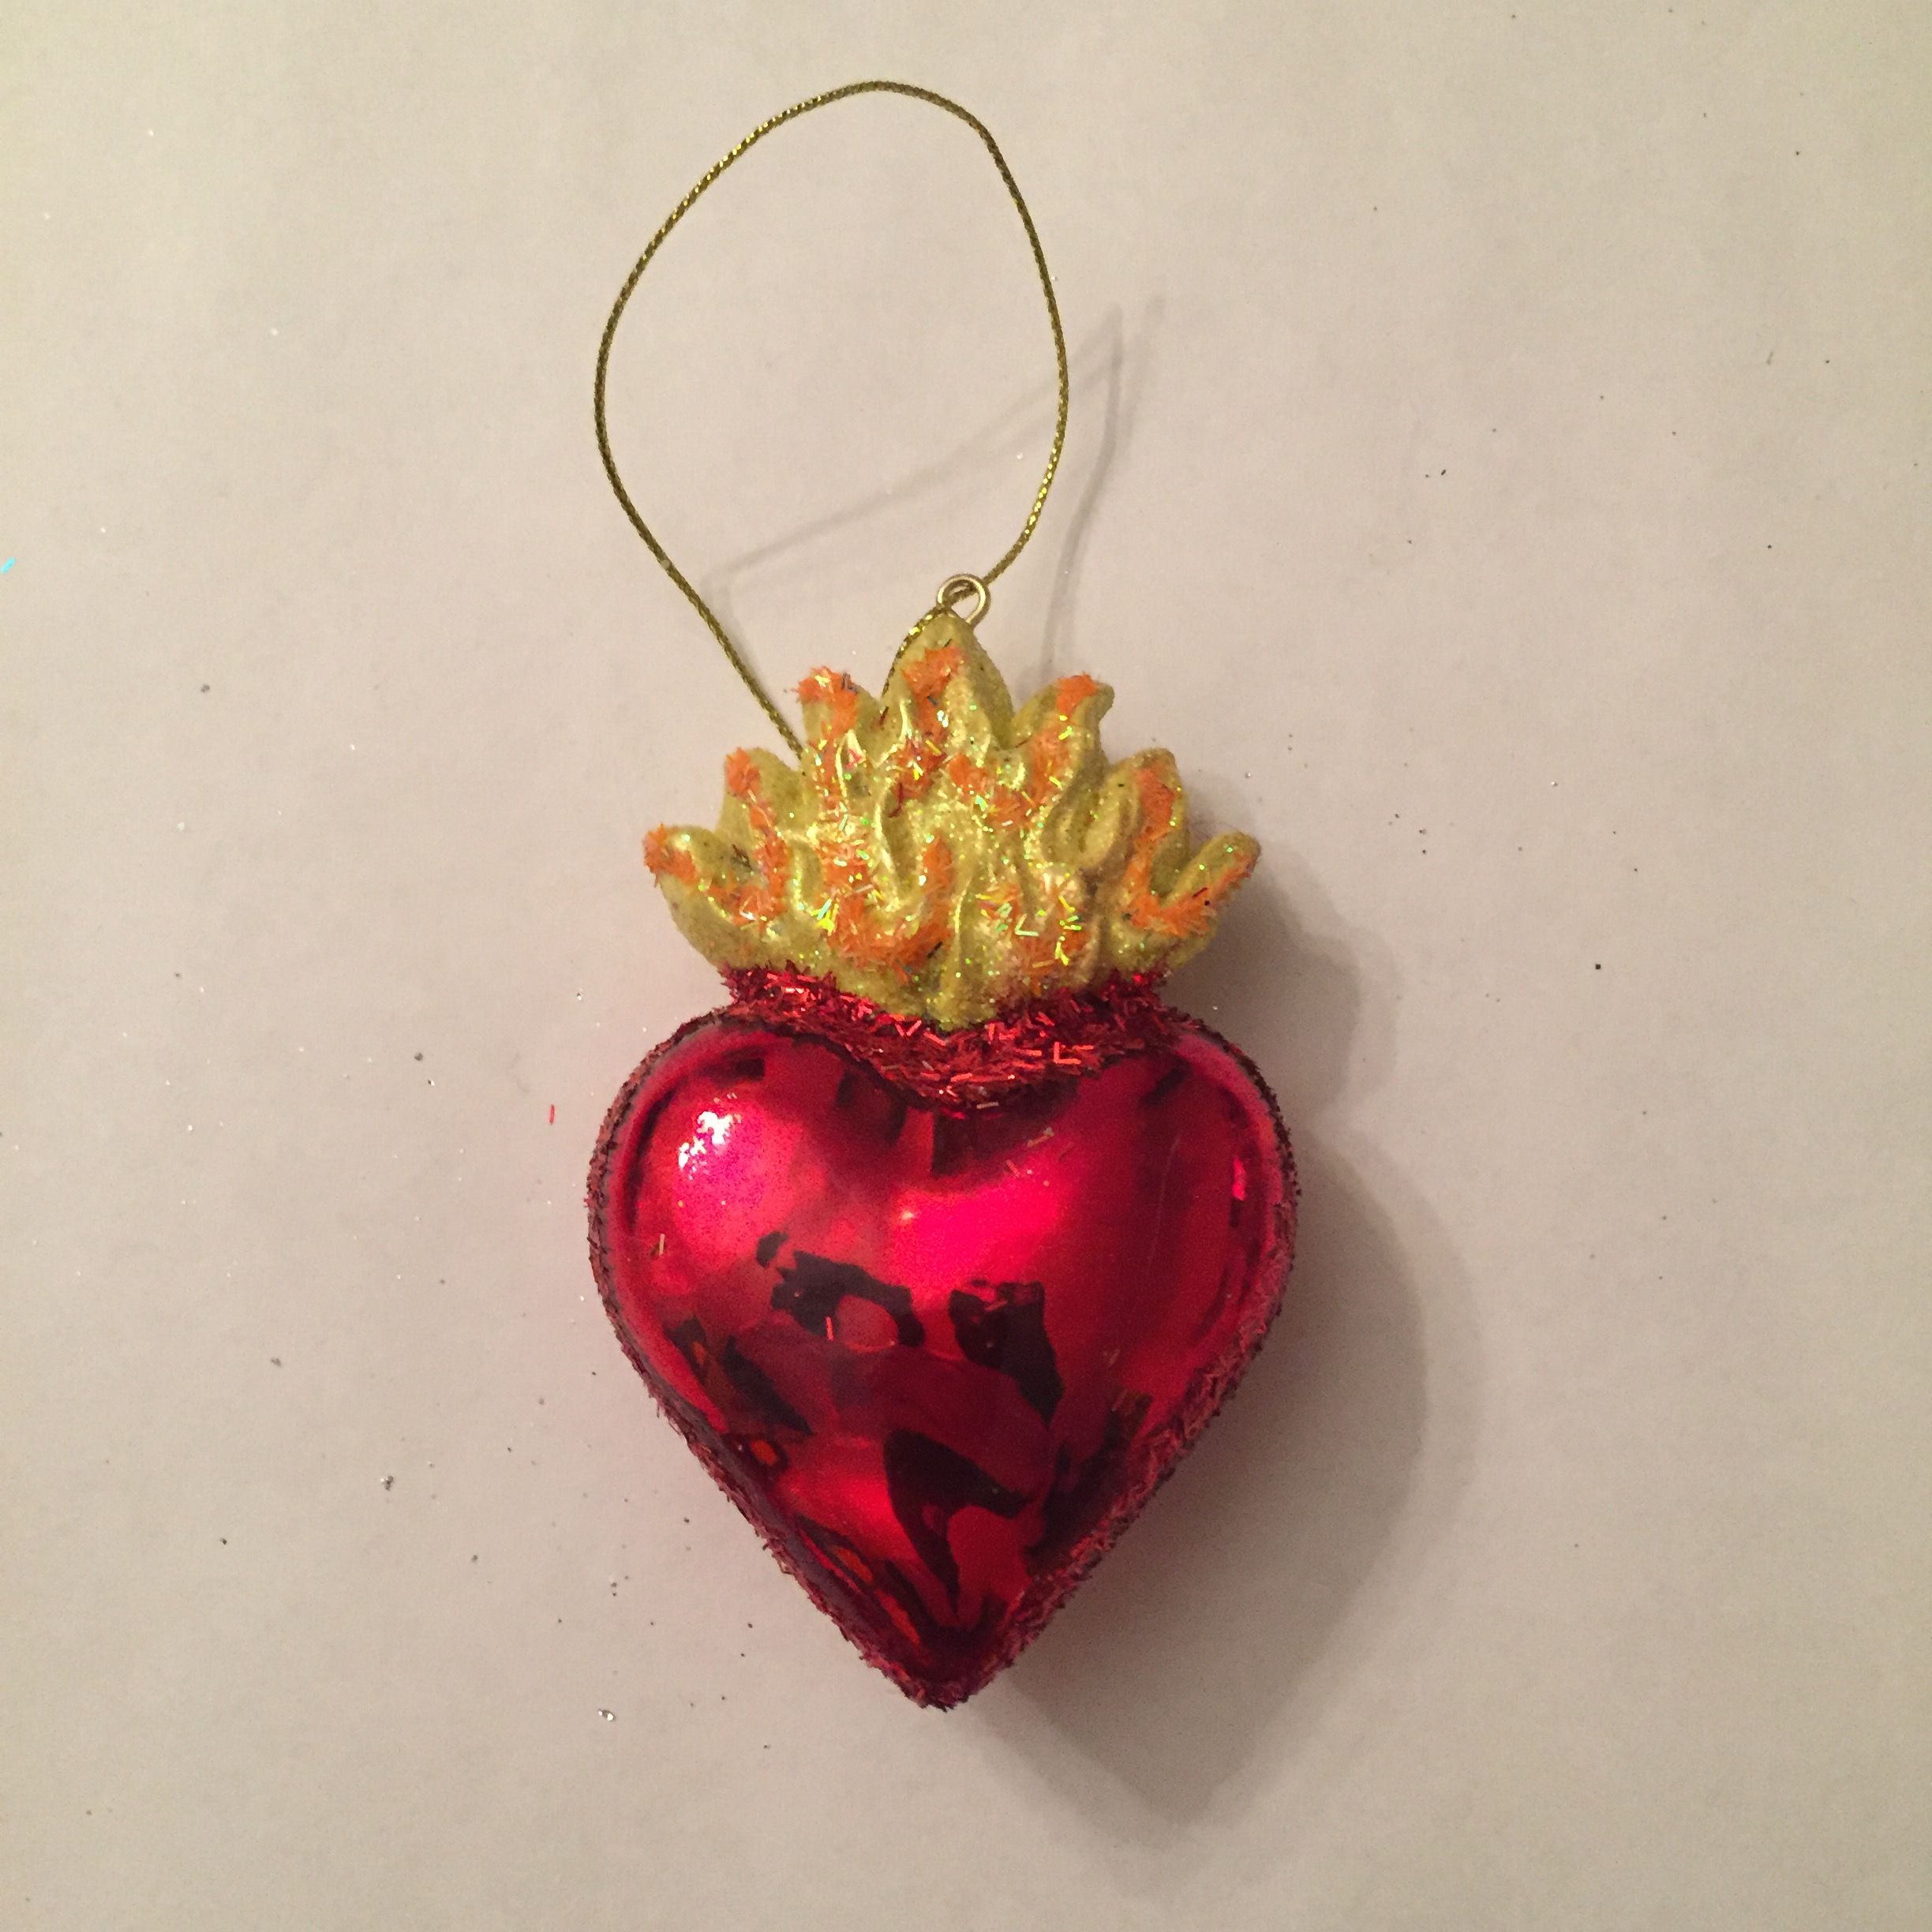 Red Heart-Shaped Ornaments | resin, plastic | 2 ornaments | Bought ...